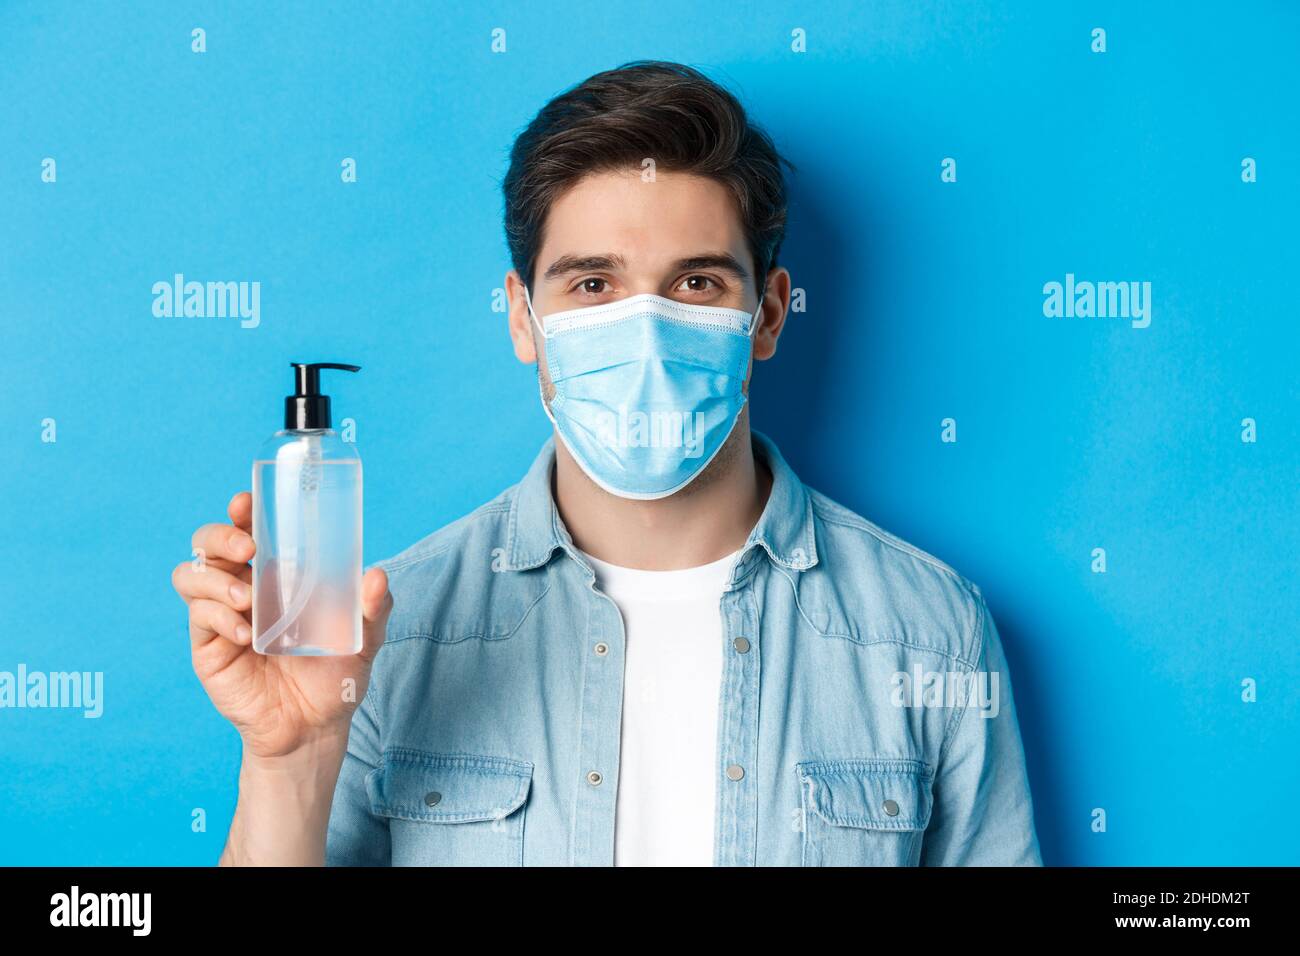 Concept of coronavirus, pandemic and preventive measures. Close-up of young man in medical mask advice to use hand sanitizer, sh Stock Photo